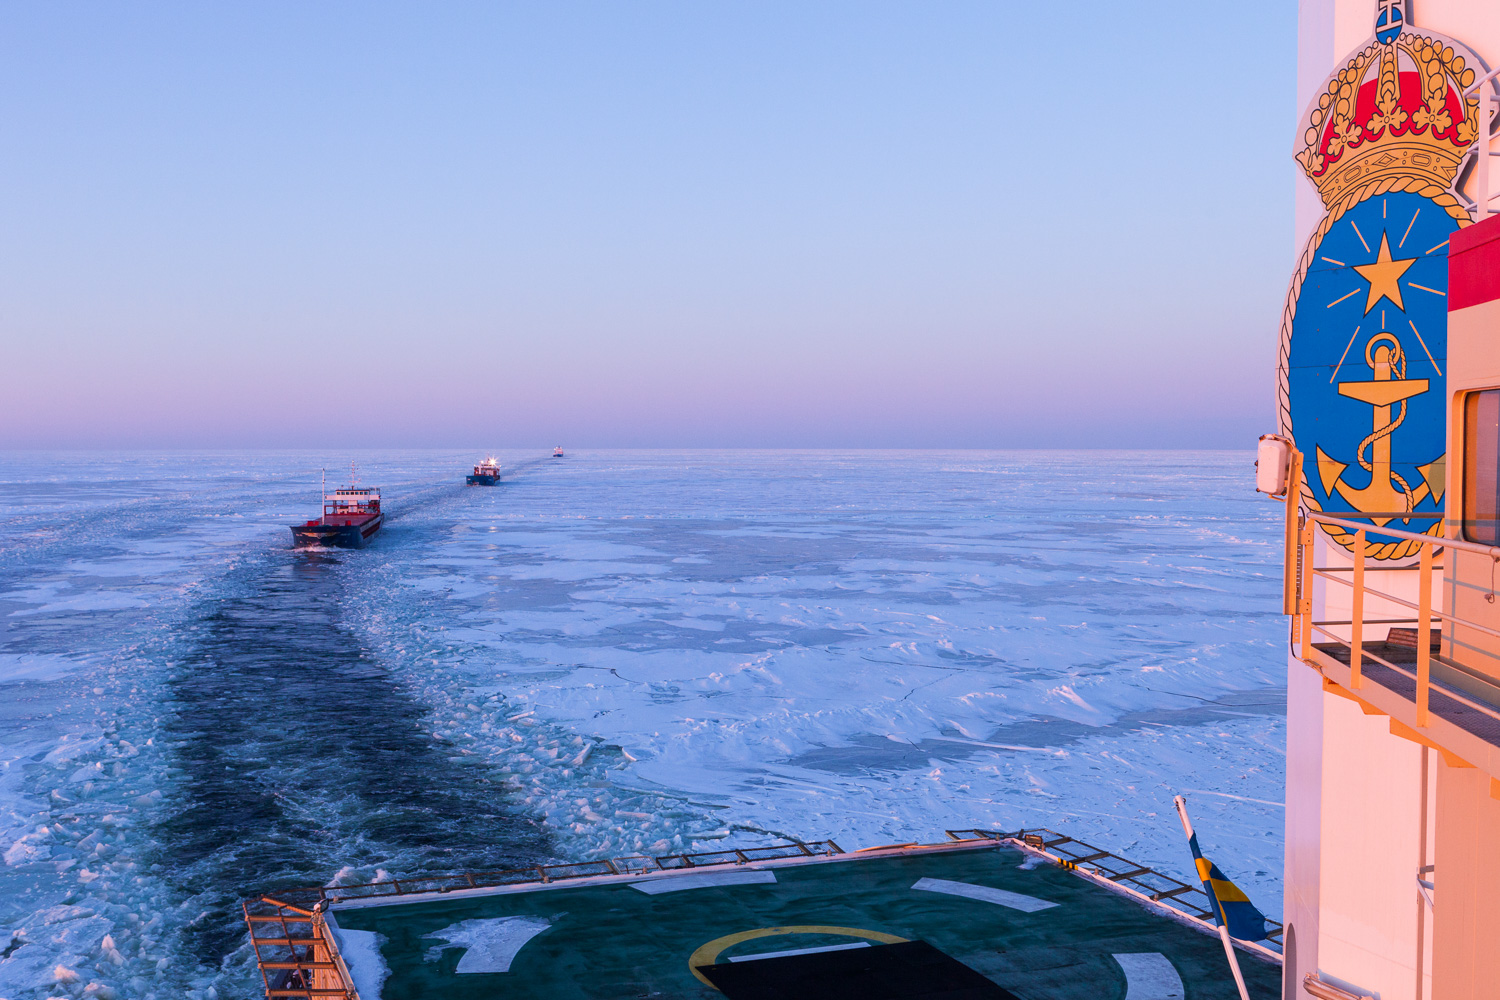 Many fisheries are entirely dependent on icebreakers to keep the shipping lanes open. A string of ships follow Odin in convoy through the ice.